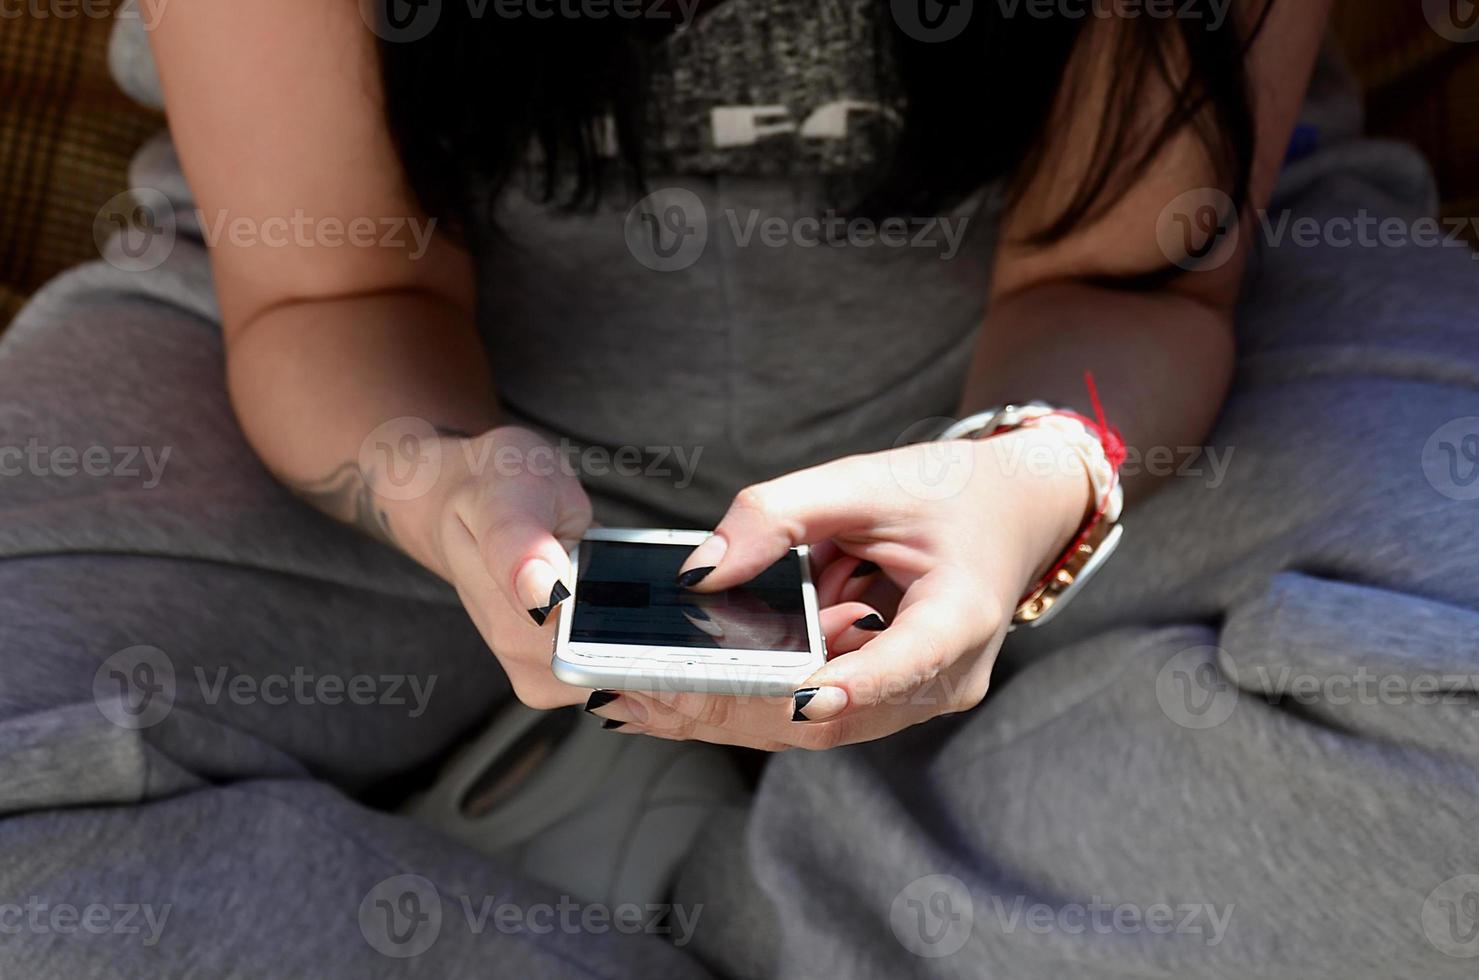 The brunette girl uses a modern touch smartphone photo